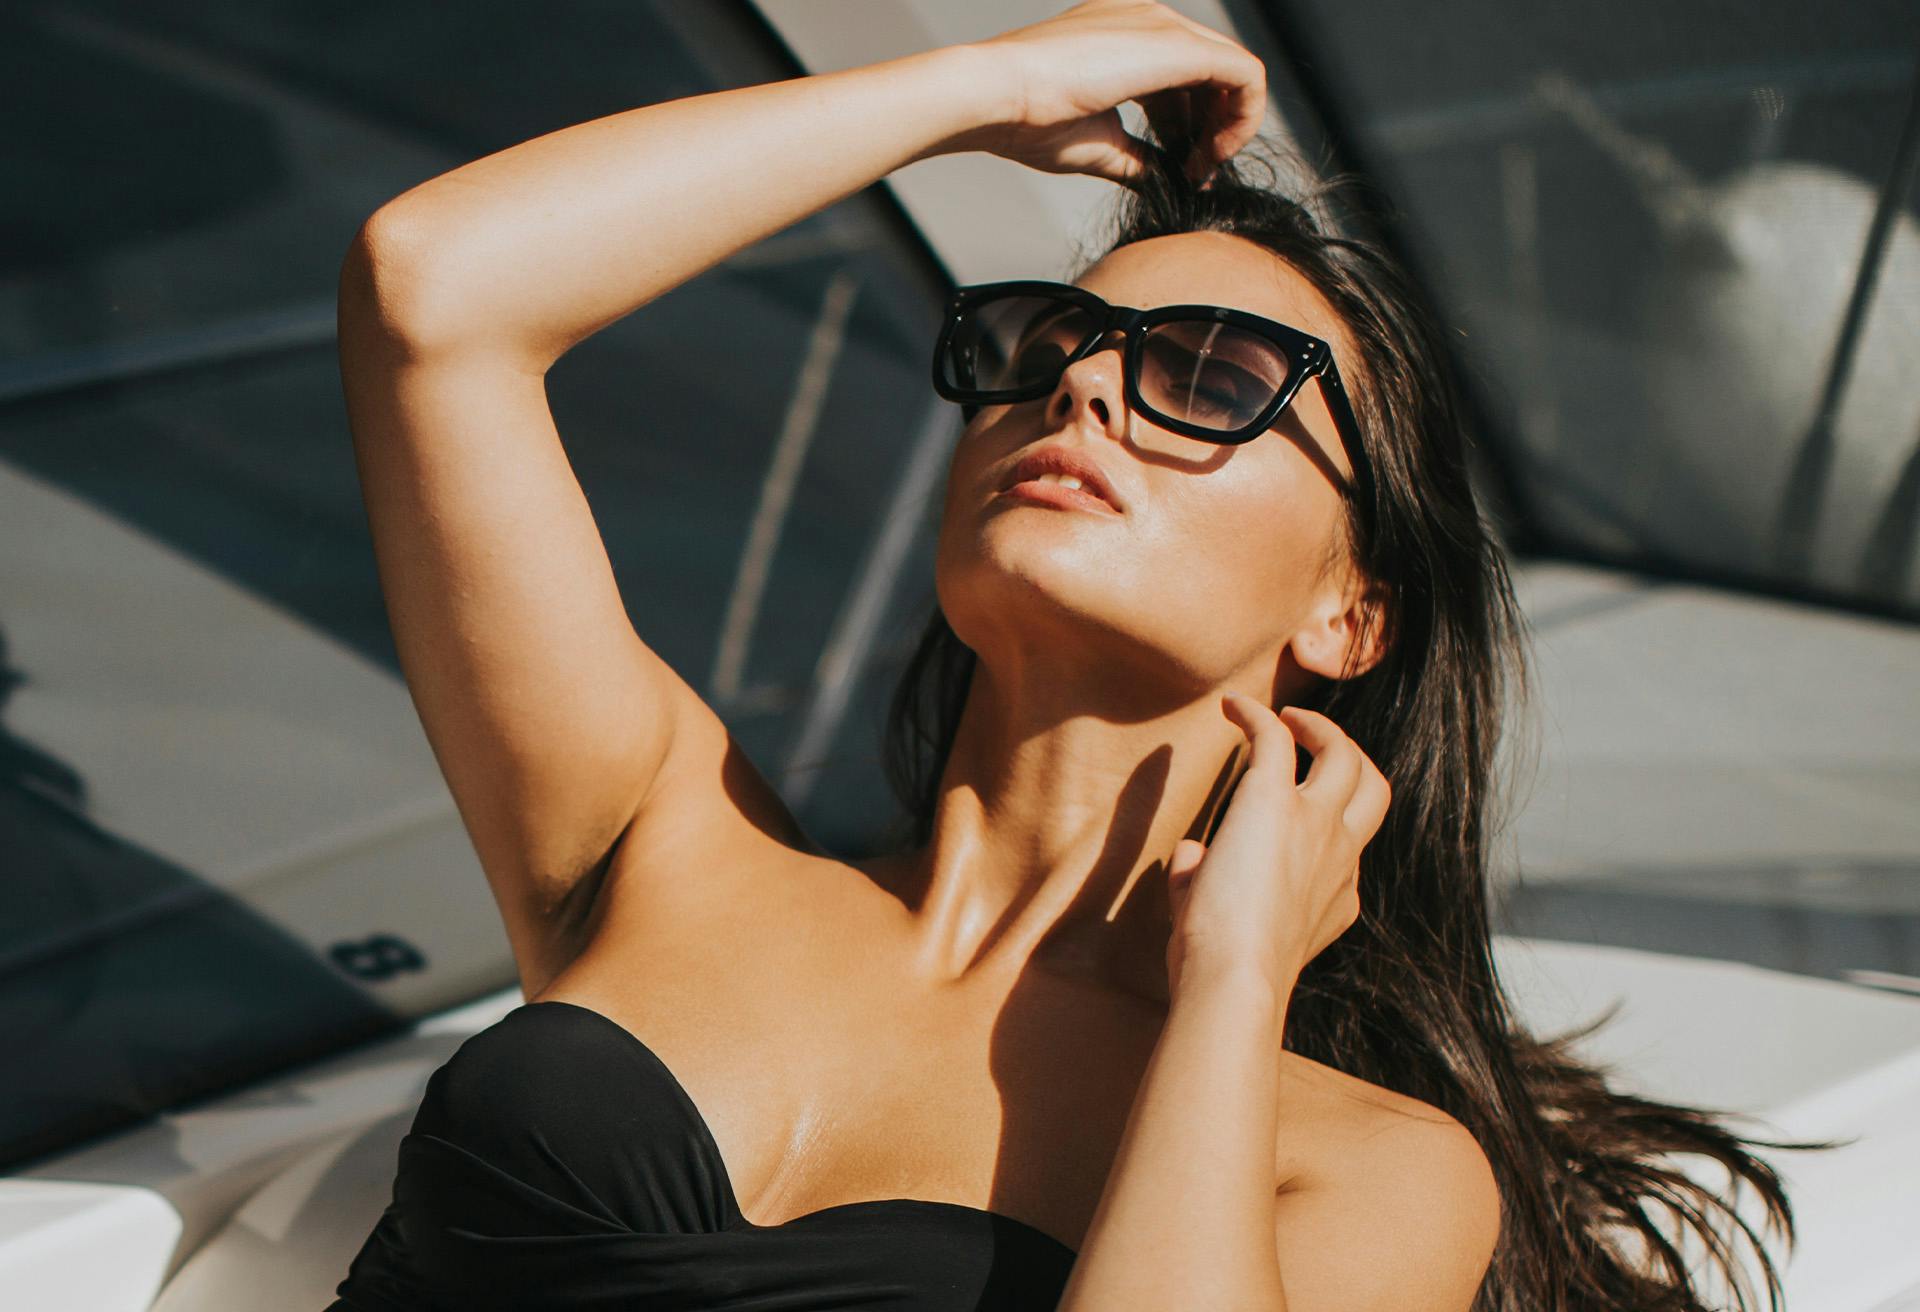 Woman leaning her head back wearing black sunglasses and bathing suit